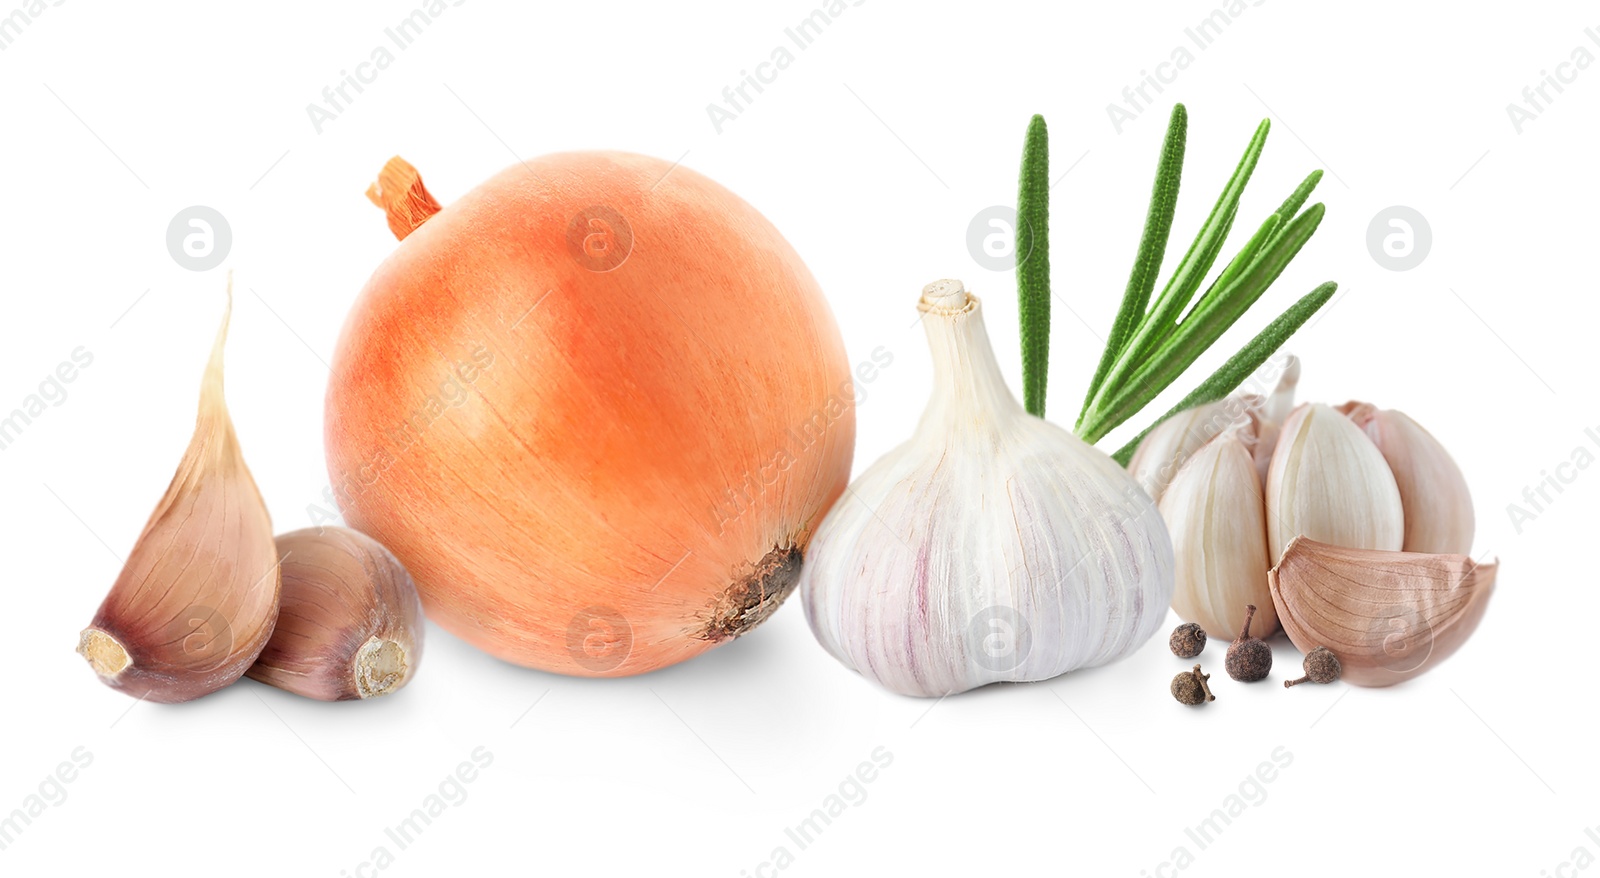 Image of Mix of fresh garlic and onion on white background. Banner design